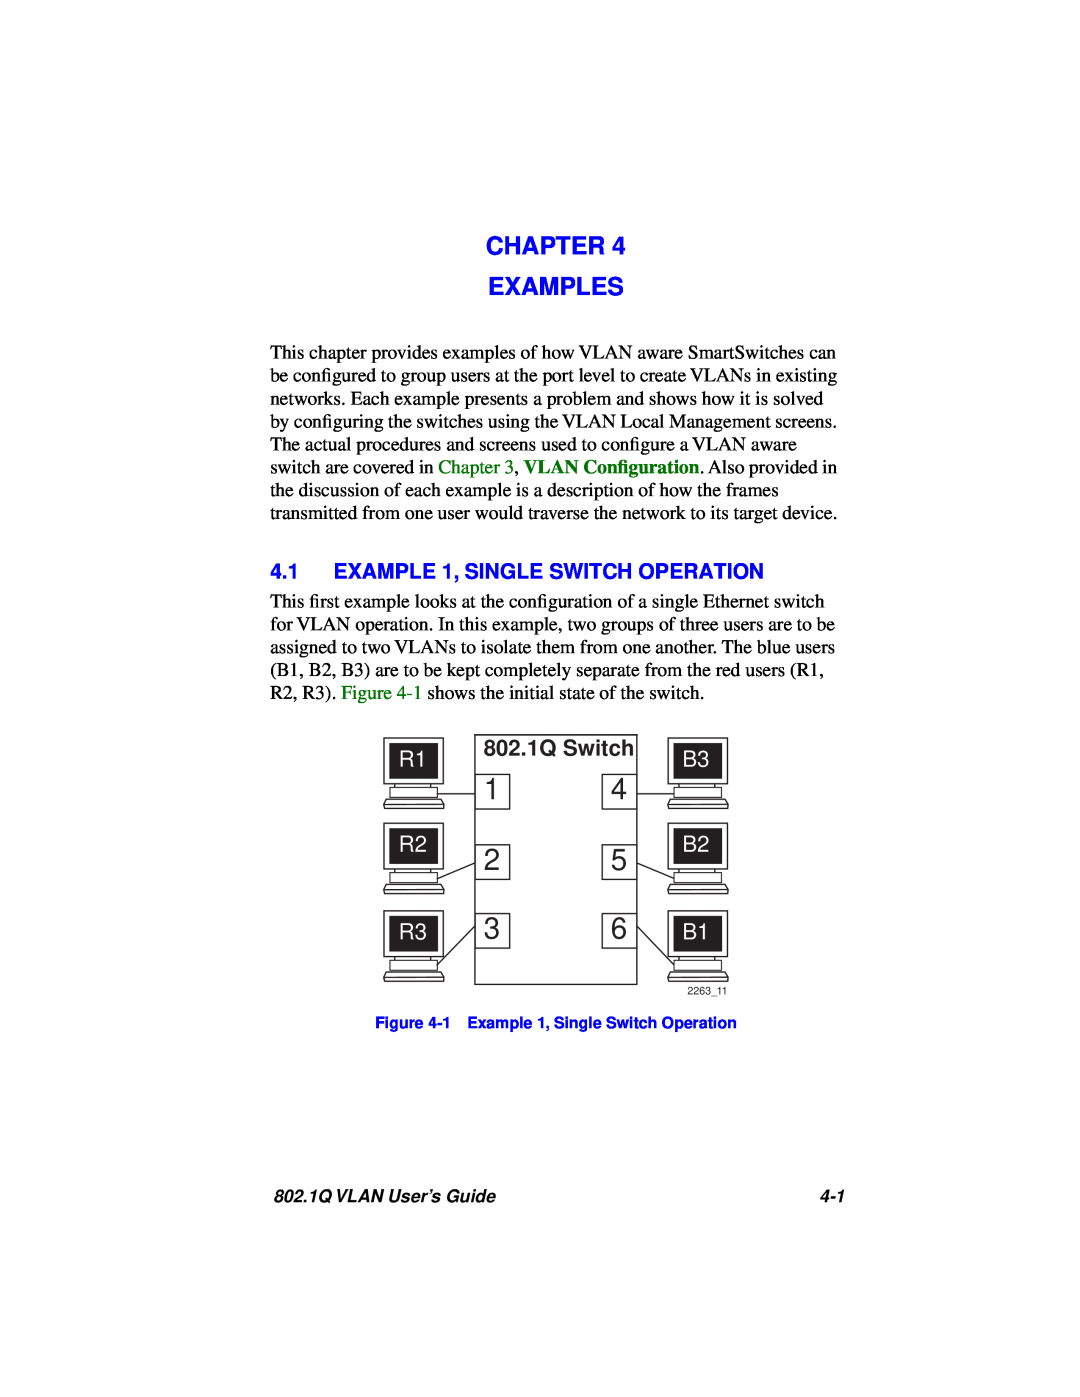 Cabletron Systems manual Chapter Examples, R1 R2 R3, 802.1Q Switch, B3 B2 B1, EXAMPLE 1, SINGLE SWITCH OPERATION 